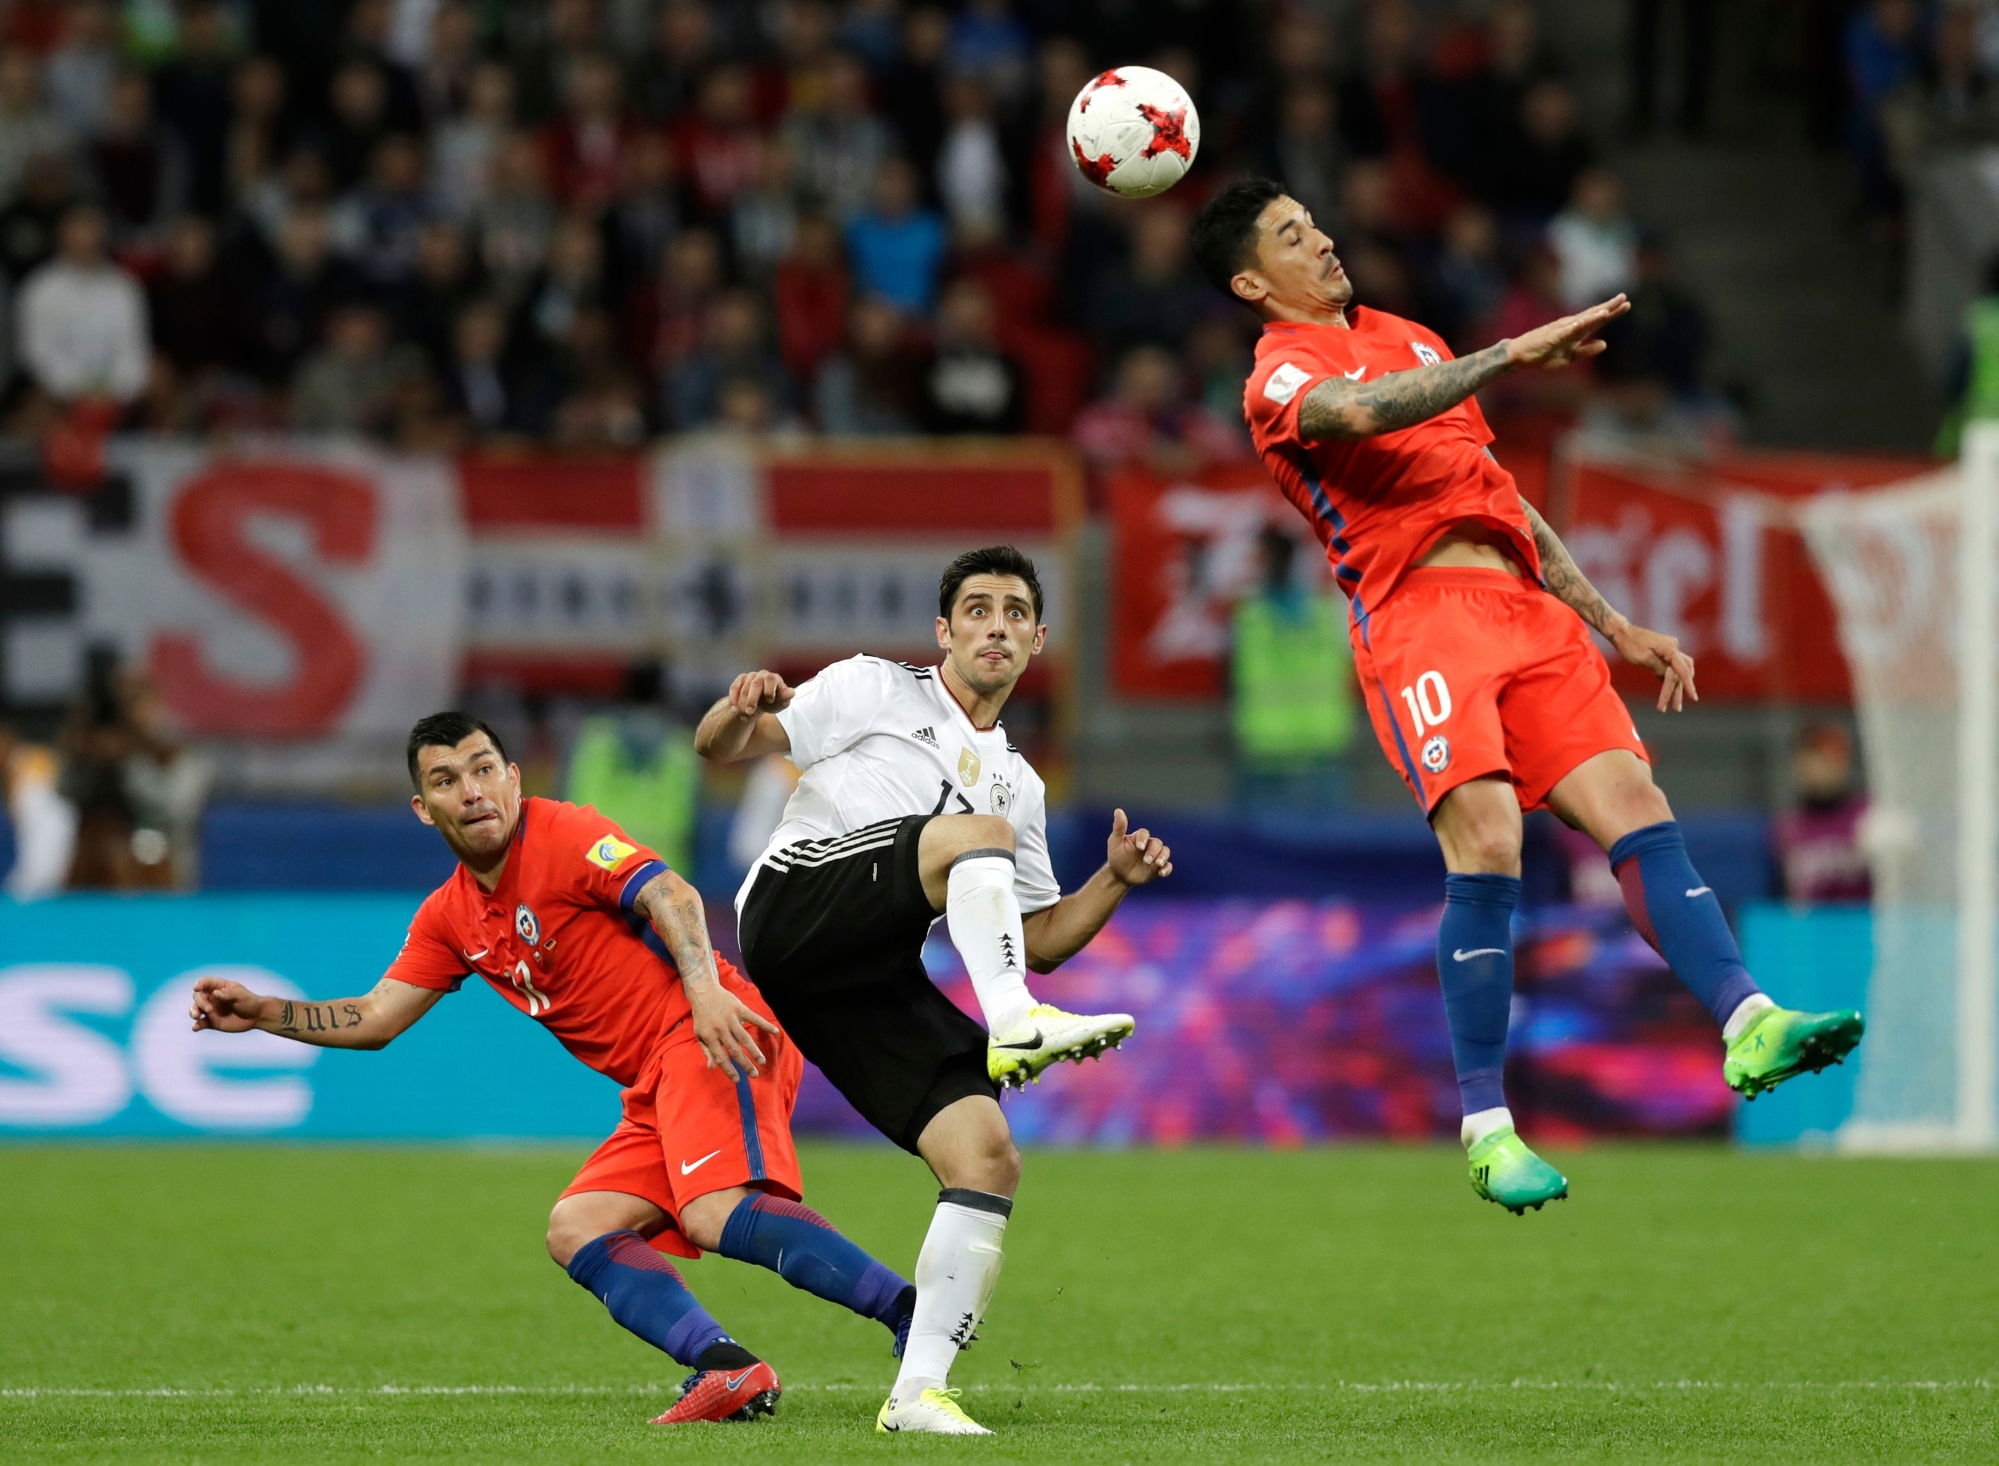 Germany's Lars Stindl, center, looks to Chile's Pablo Hernandez, right, during the Confederations Cup, Group B soccer match between Germany and Chile, at the Kazan Arena, Russia, Thursday, June 22, 2017. (AP Photo/Thanassis Stavrakis) Soccer Confed Cup Germany Chile